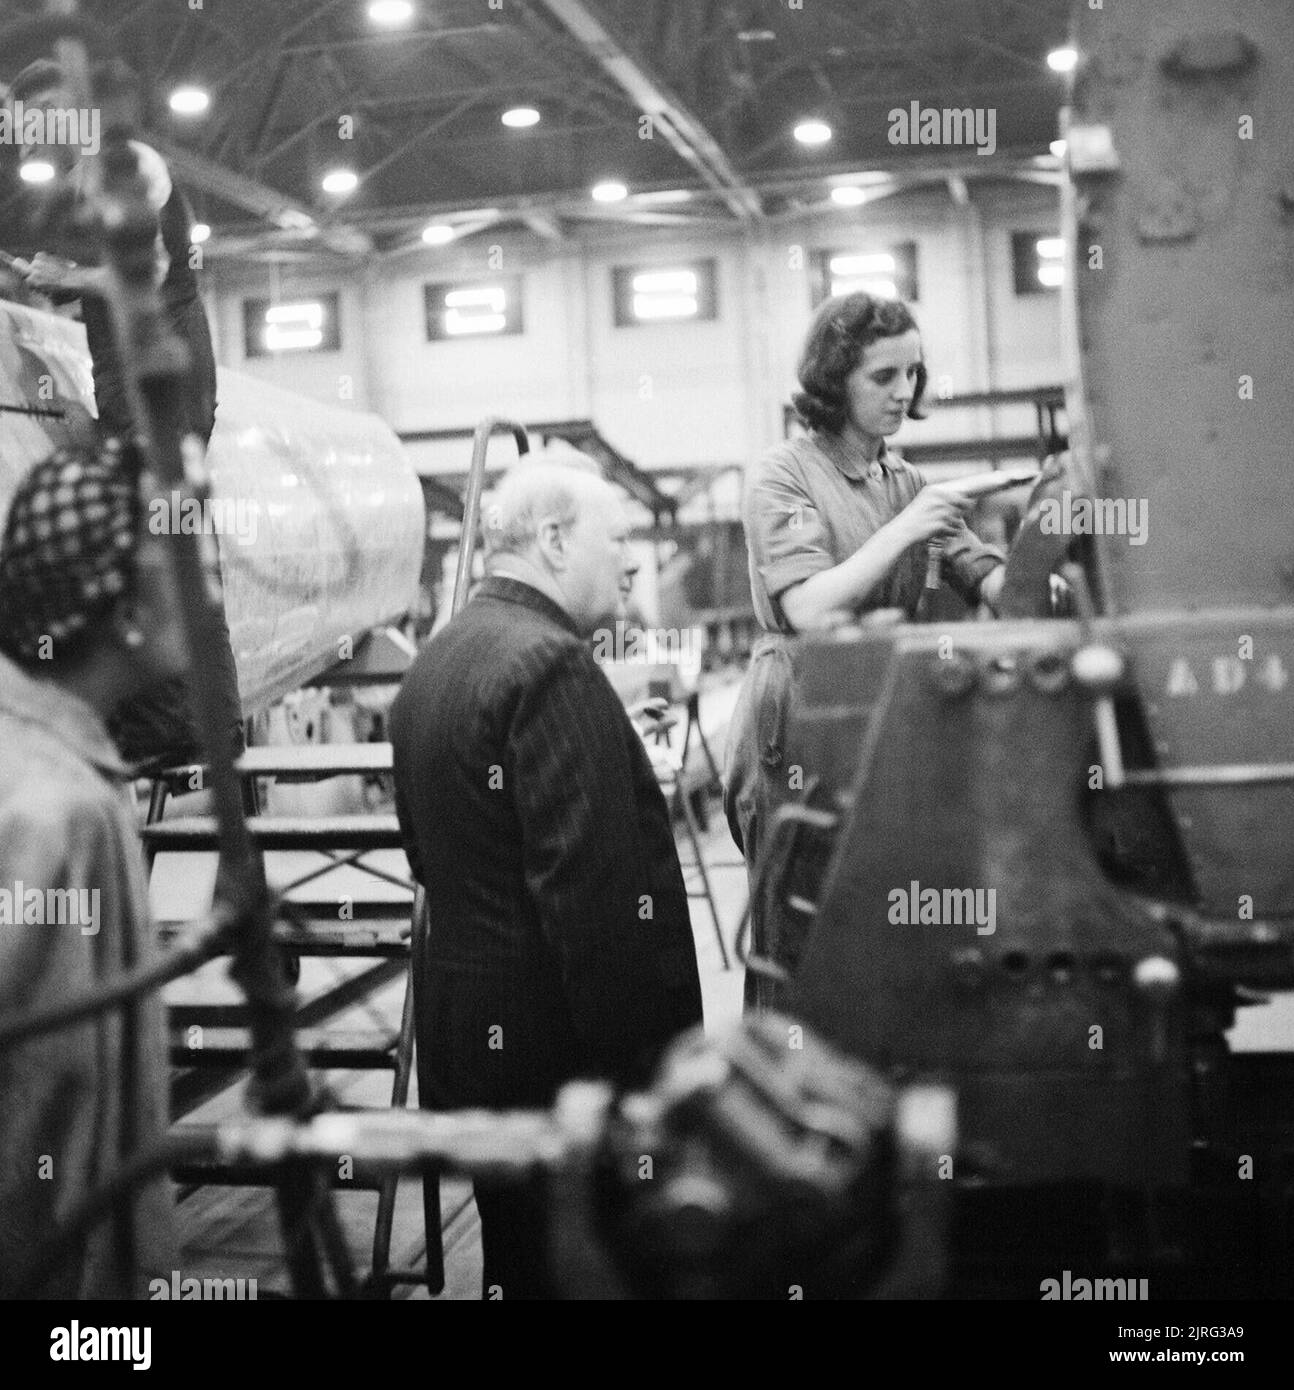 Winston Churchill watches a female riveter at work on a Supermarine Spitfire at the Castle Bromwich factory in Birmingham, 28 September 1941. The Prime Minister Winston Churchill observes a female riveter working on a Supermarine Spitfire at the Castle Bromwich factory in Birmingham, England, on 28 September 1941. Stock Photo